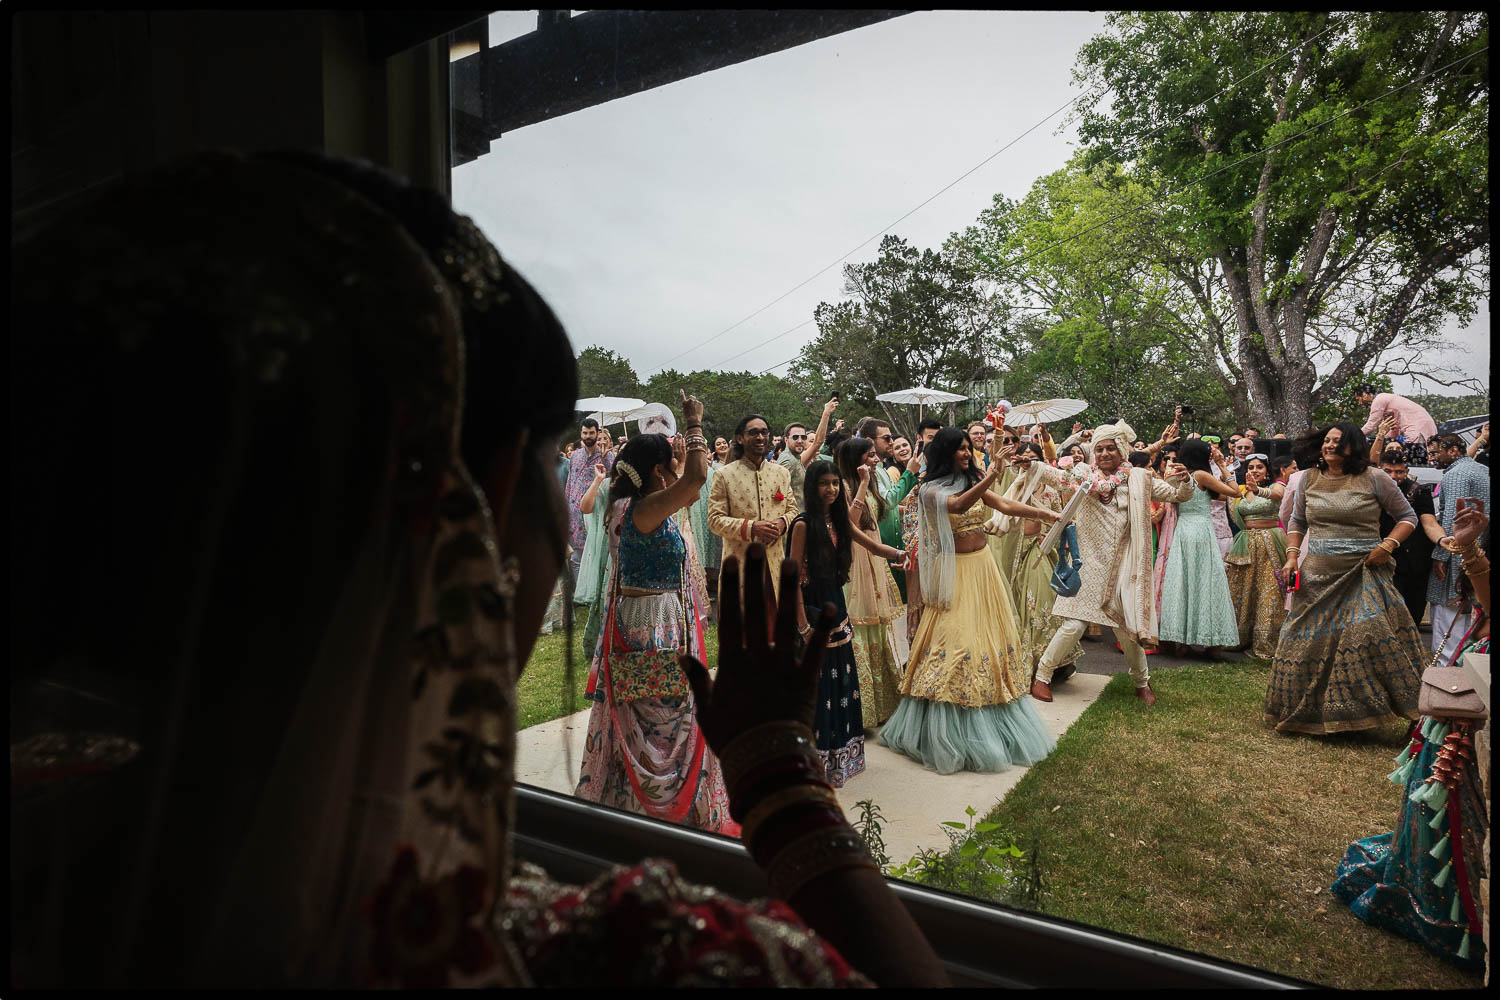 a group of people in traditional clothing  celebrating during the baraat shows the bride observing through the window